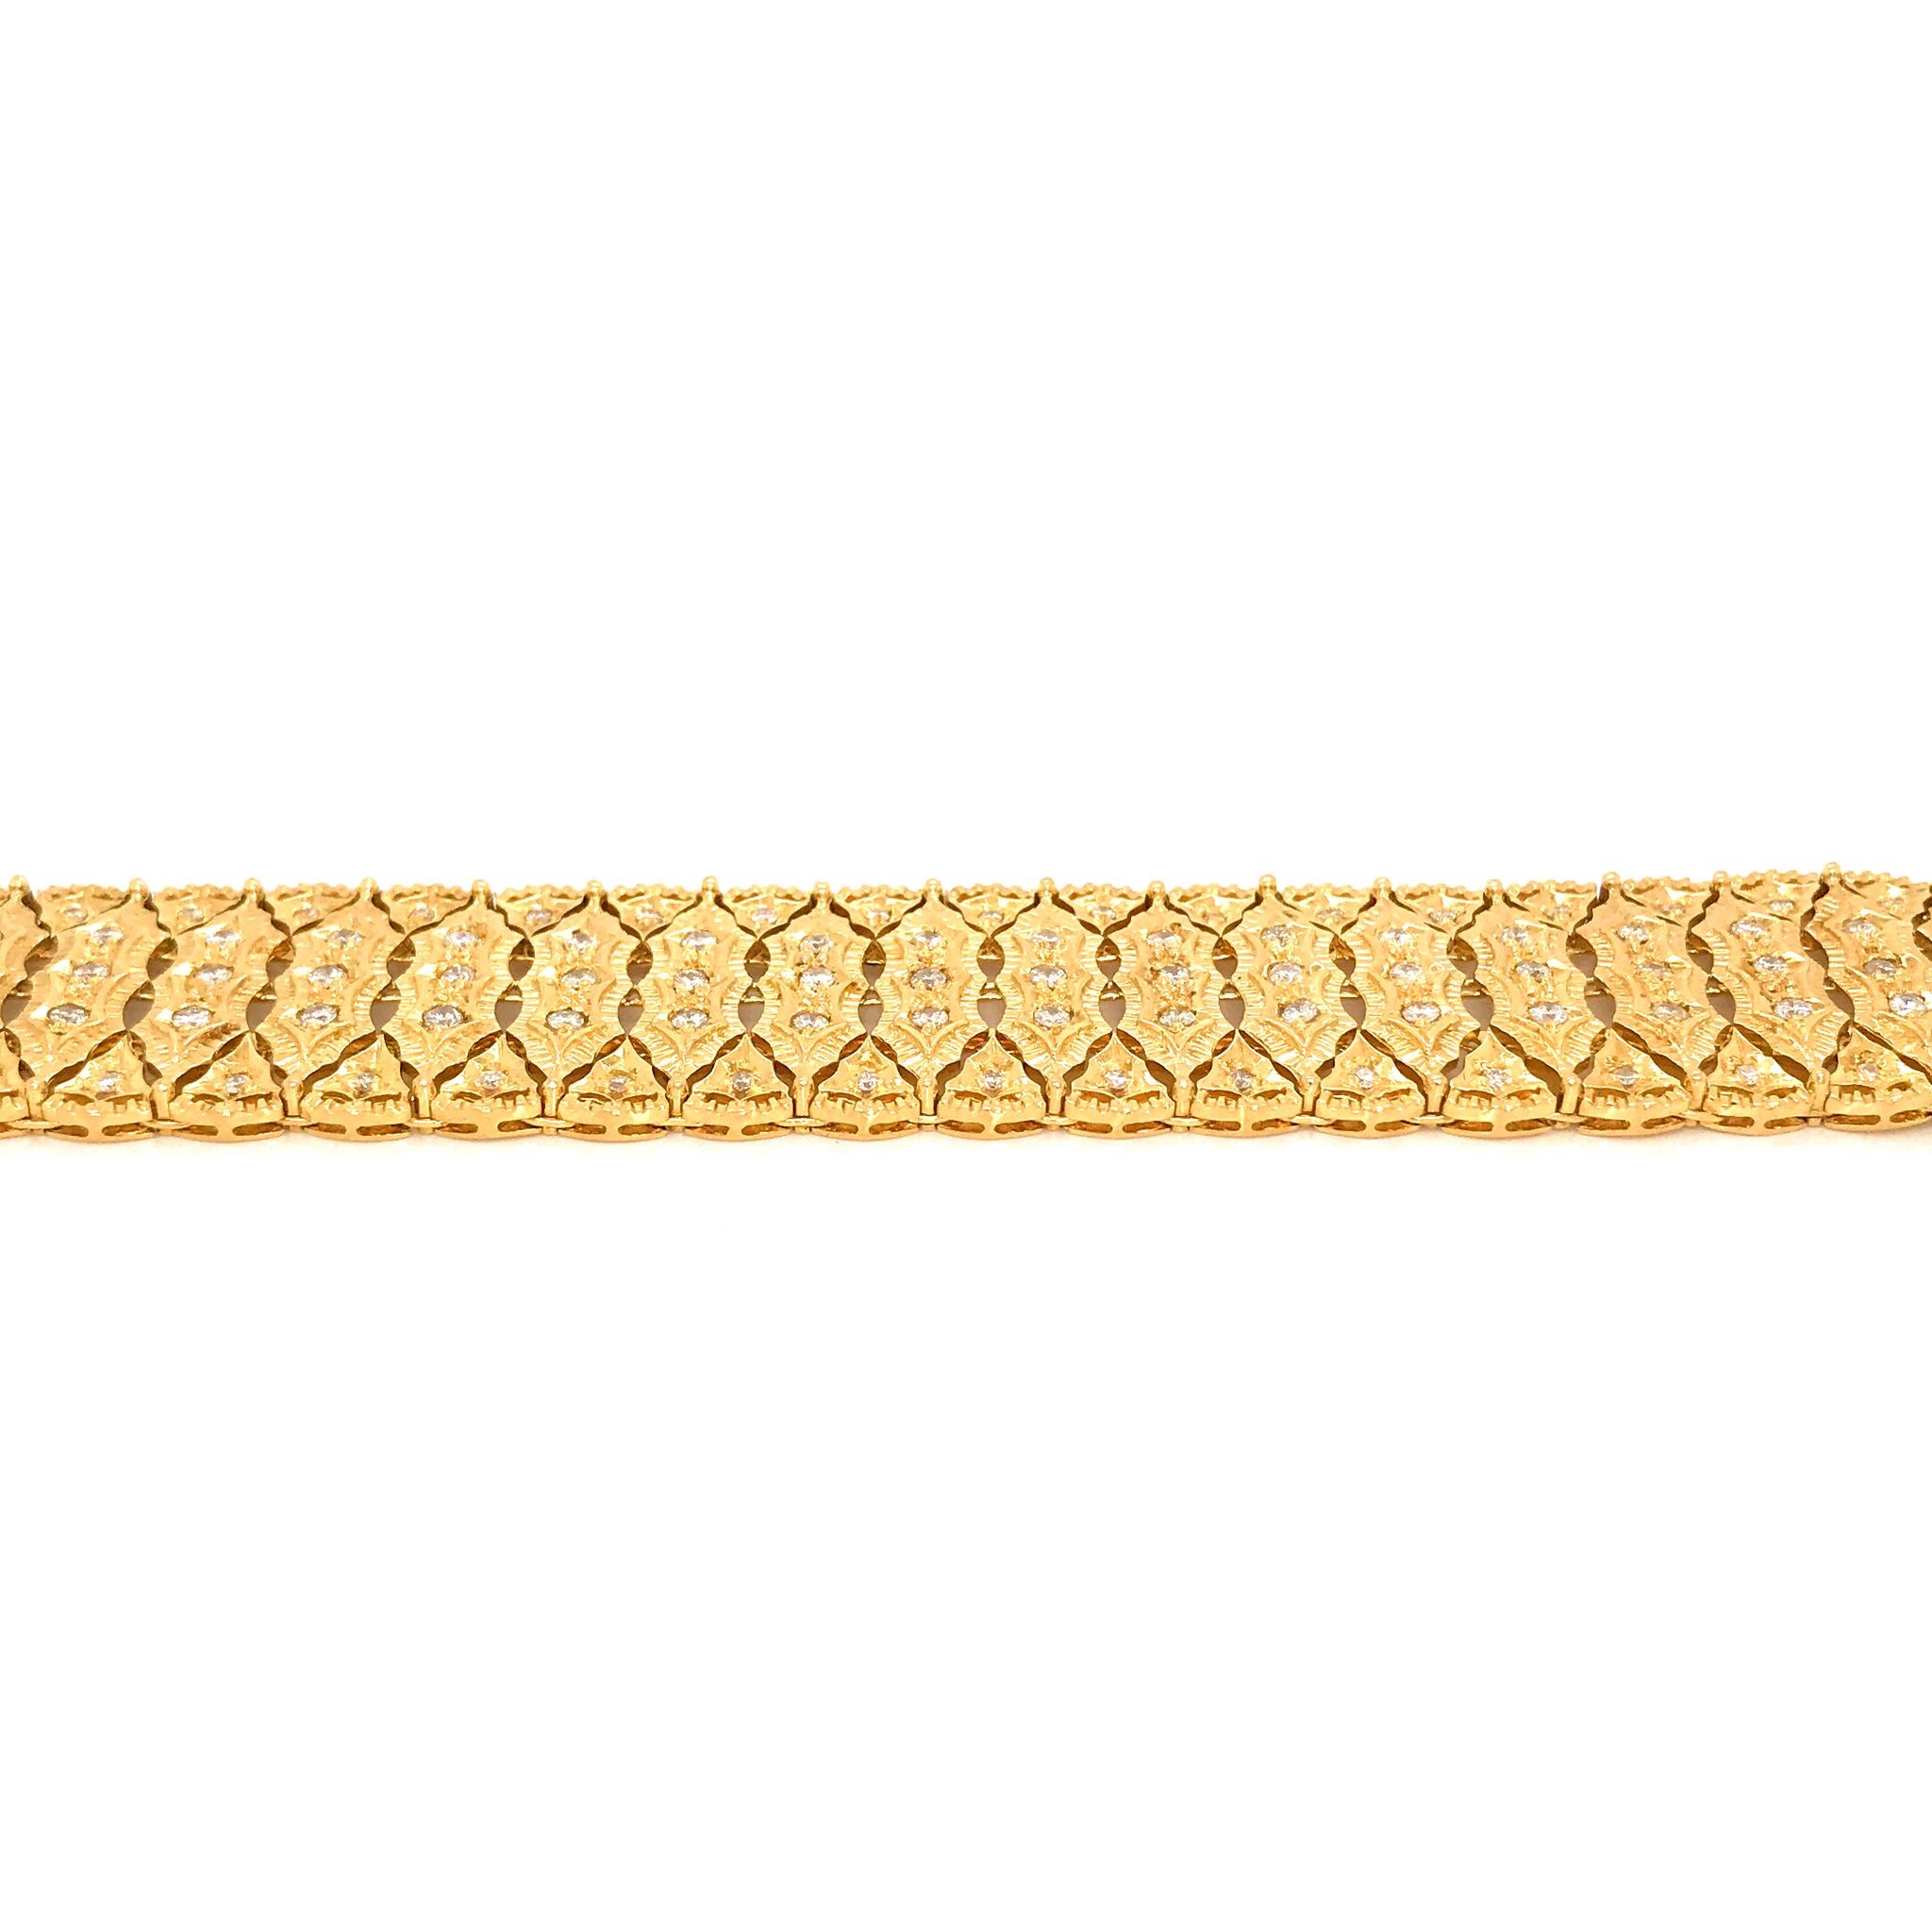 METAL: 18k Yellow Gold
STONE WEIGHT: 2.25ct twd (estimated)
BRACELET LENGTH: 6.5 inches
TOTAL WEIGHT: 41.2 grams
